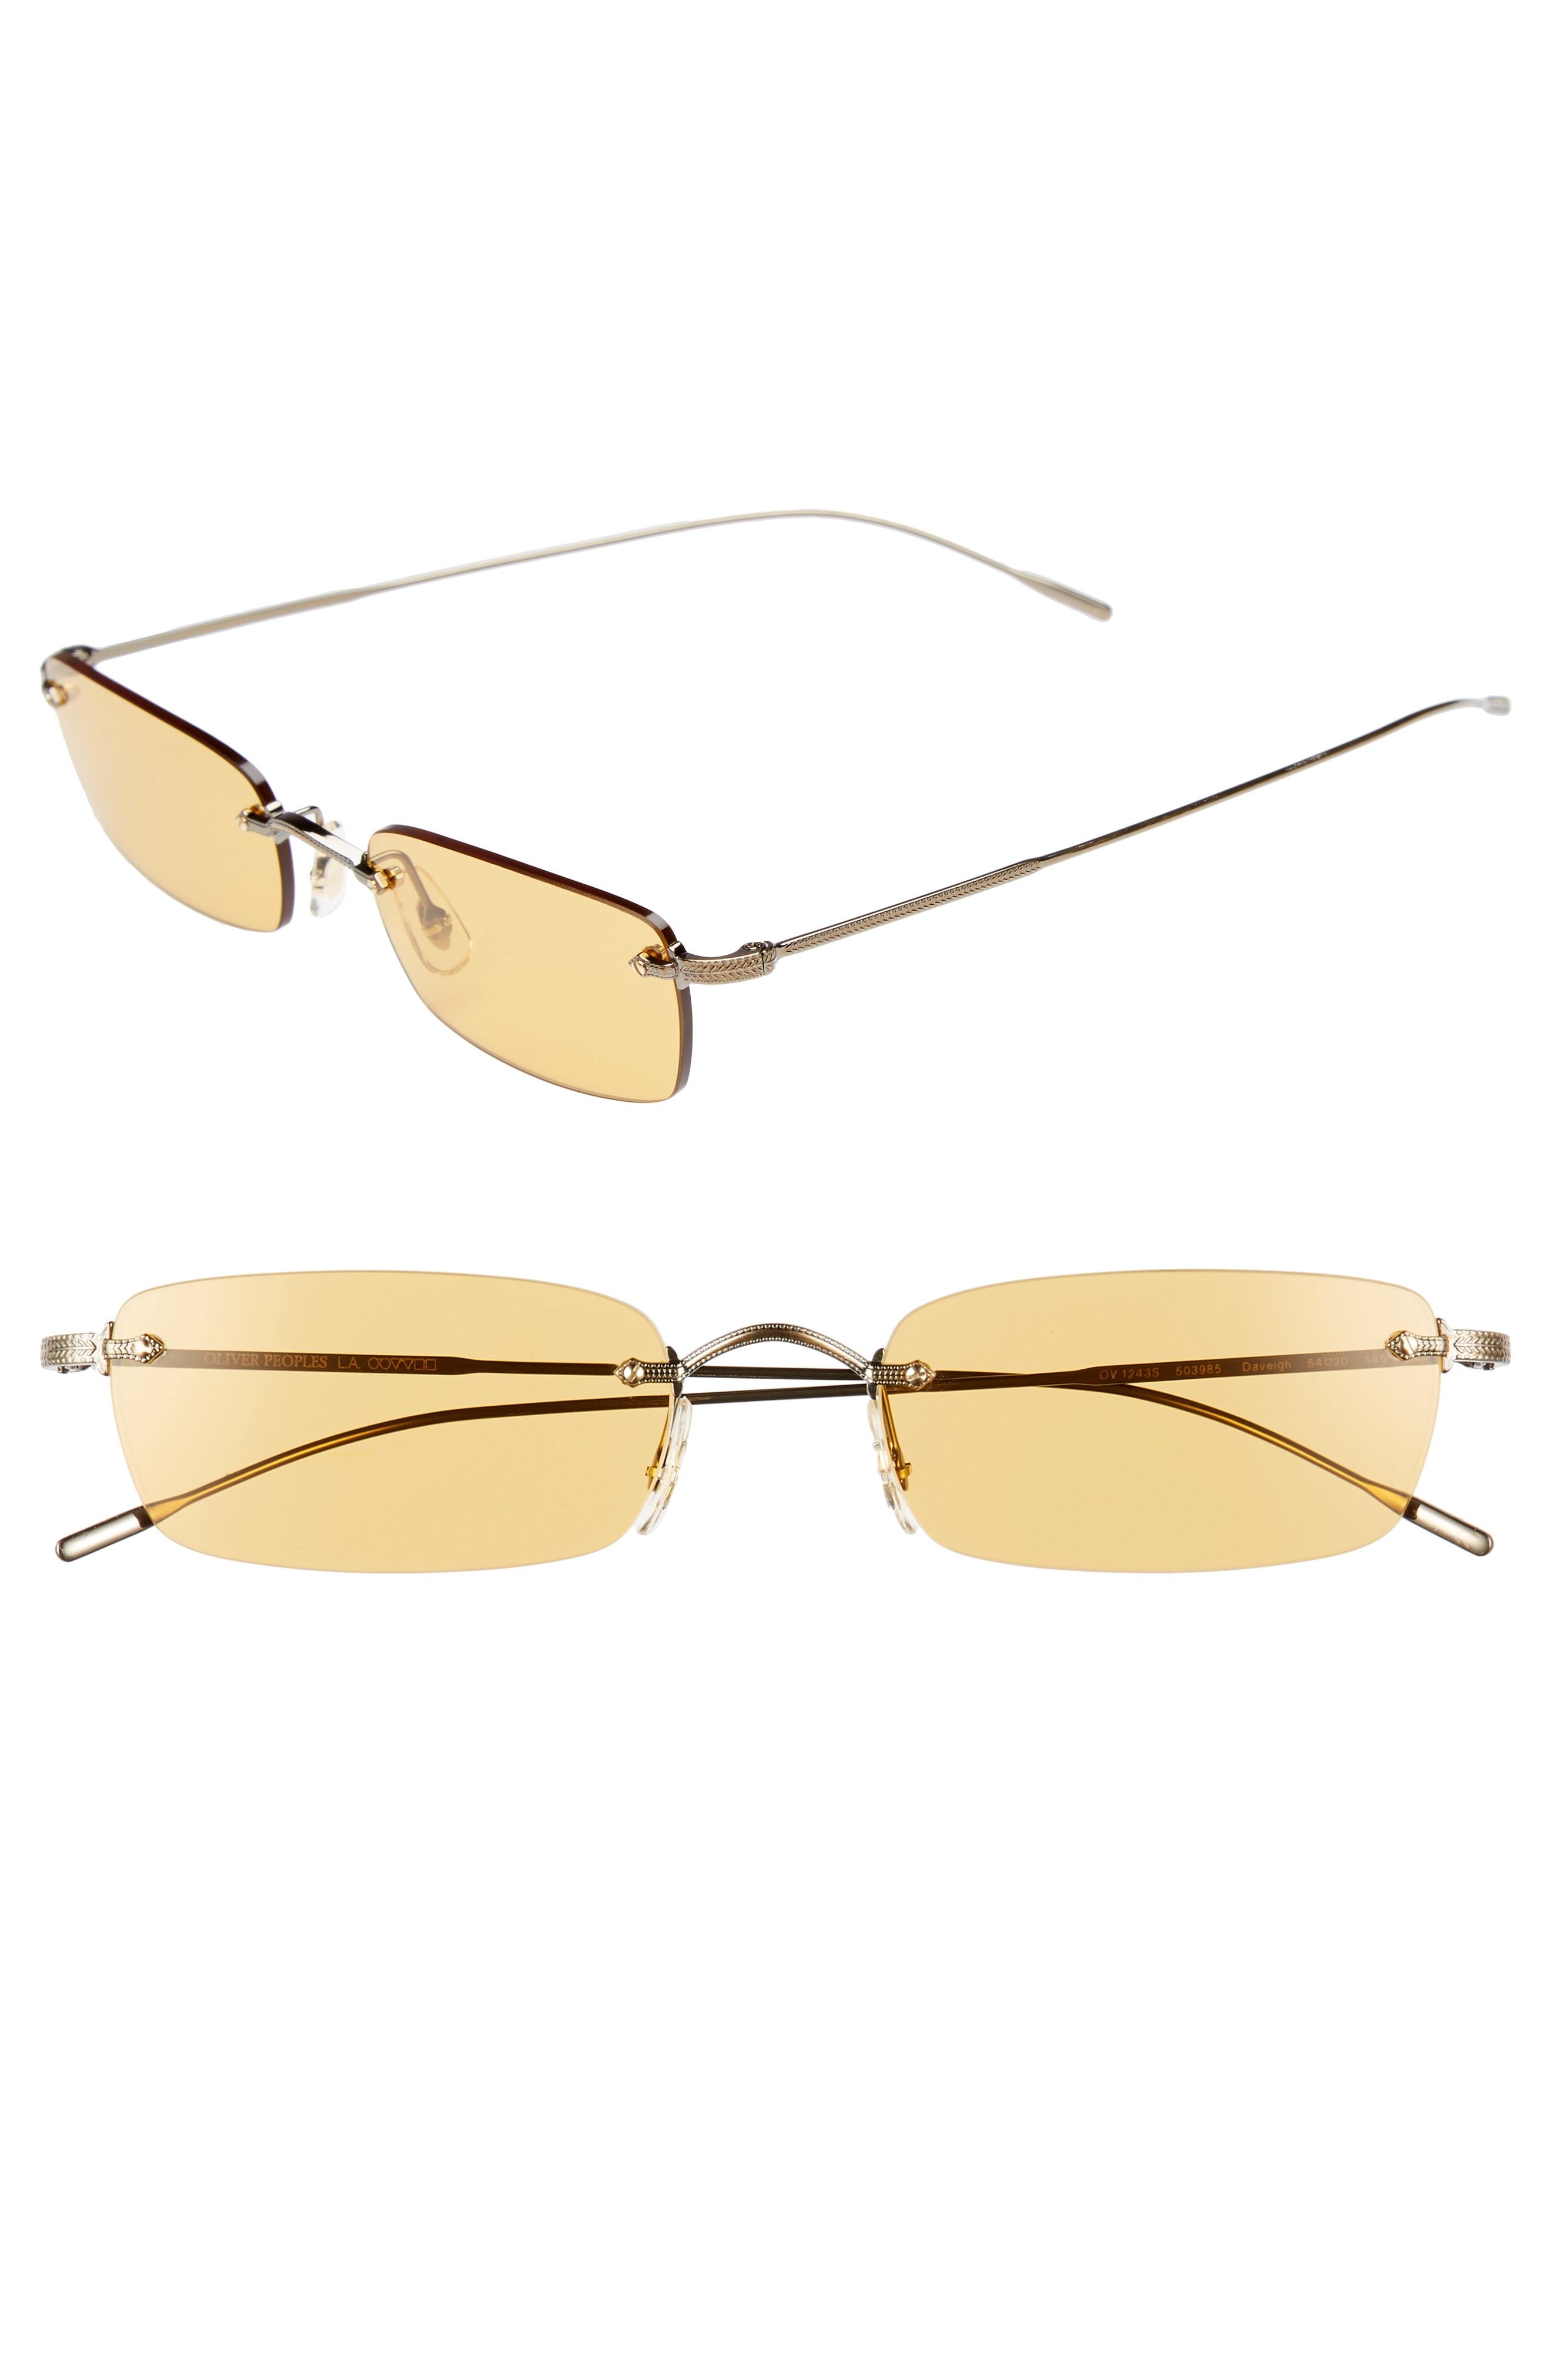 Oliver Peoples Daveigh 54mm Sunglasses, $420 | Nordstrom | Lookastic